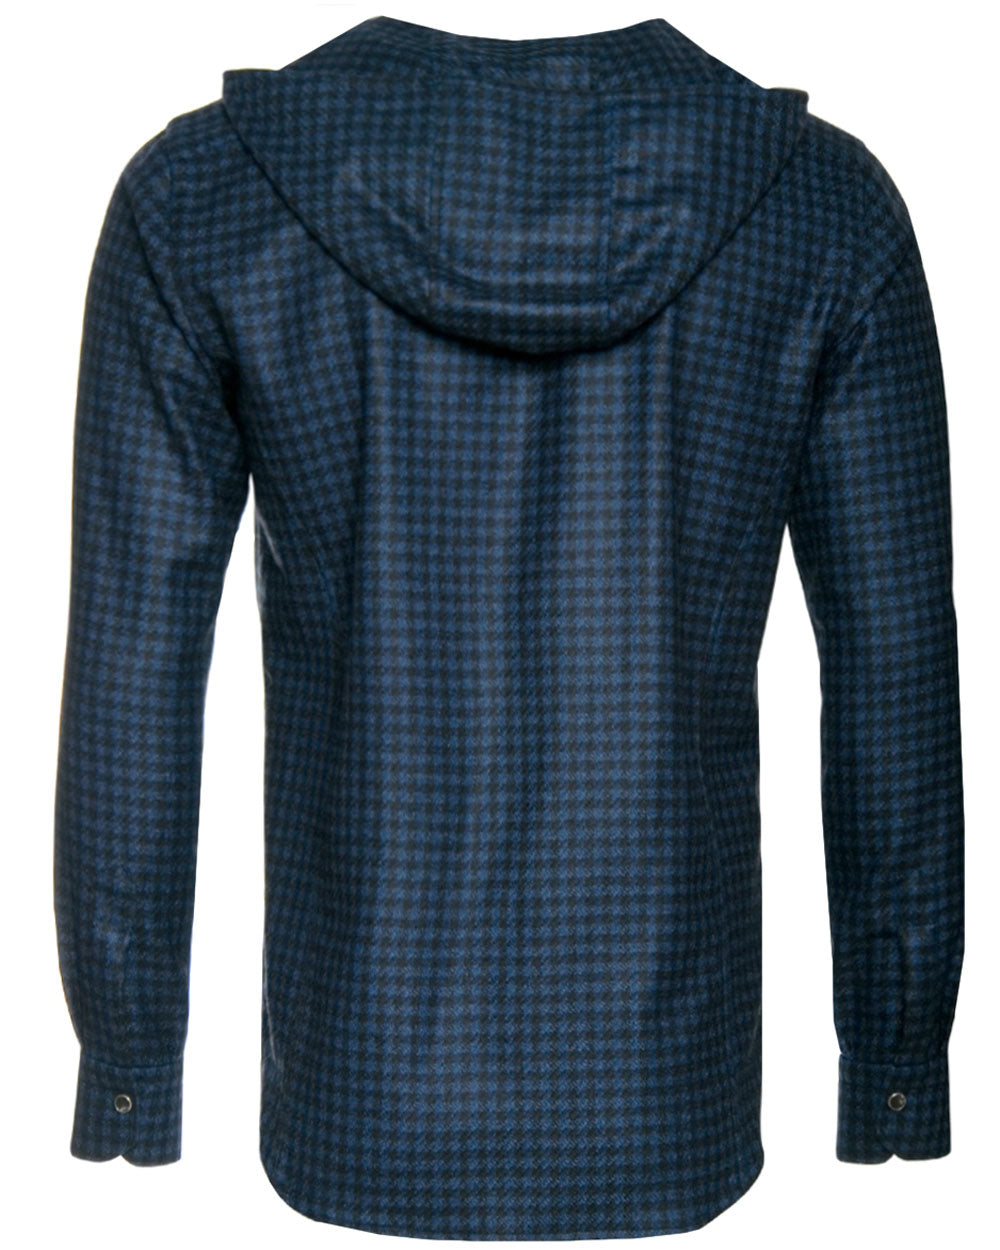 Black and Blue Checked Cashmere Mariano Hooded Shirt Jacket